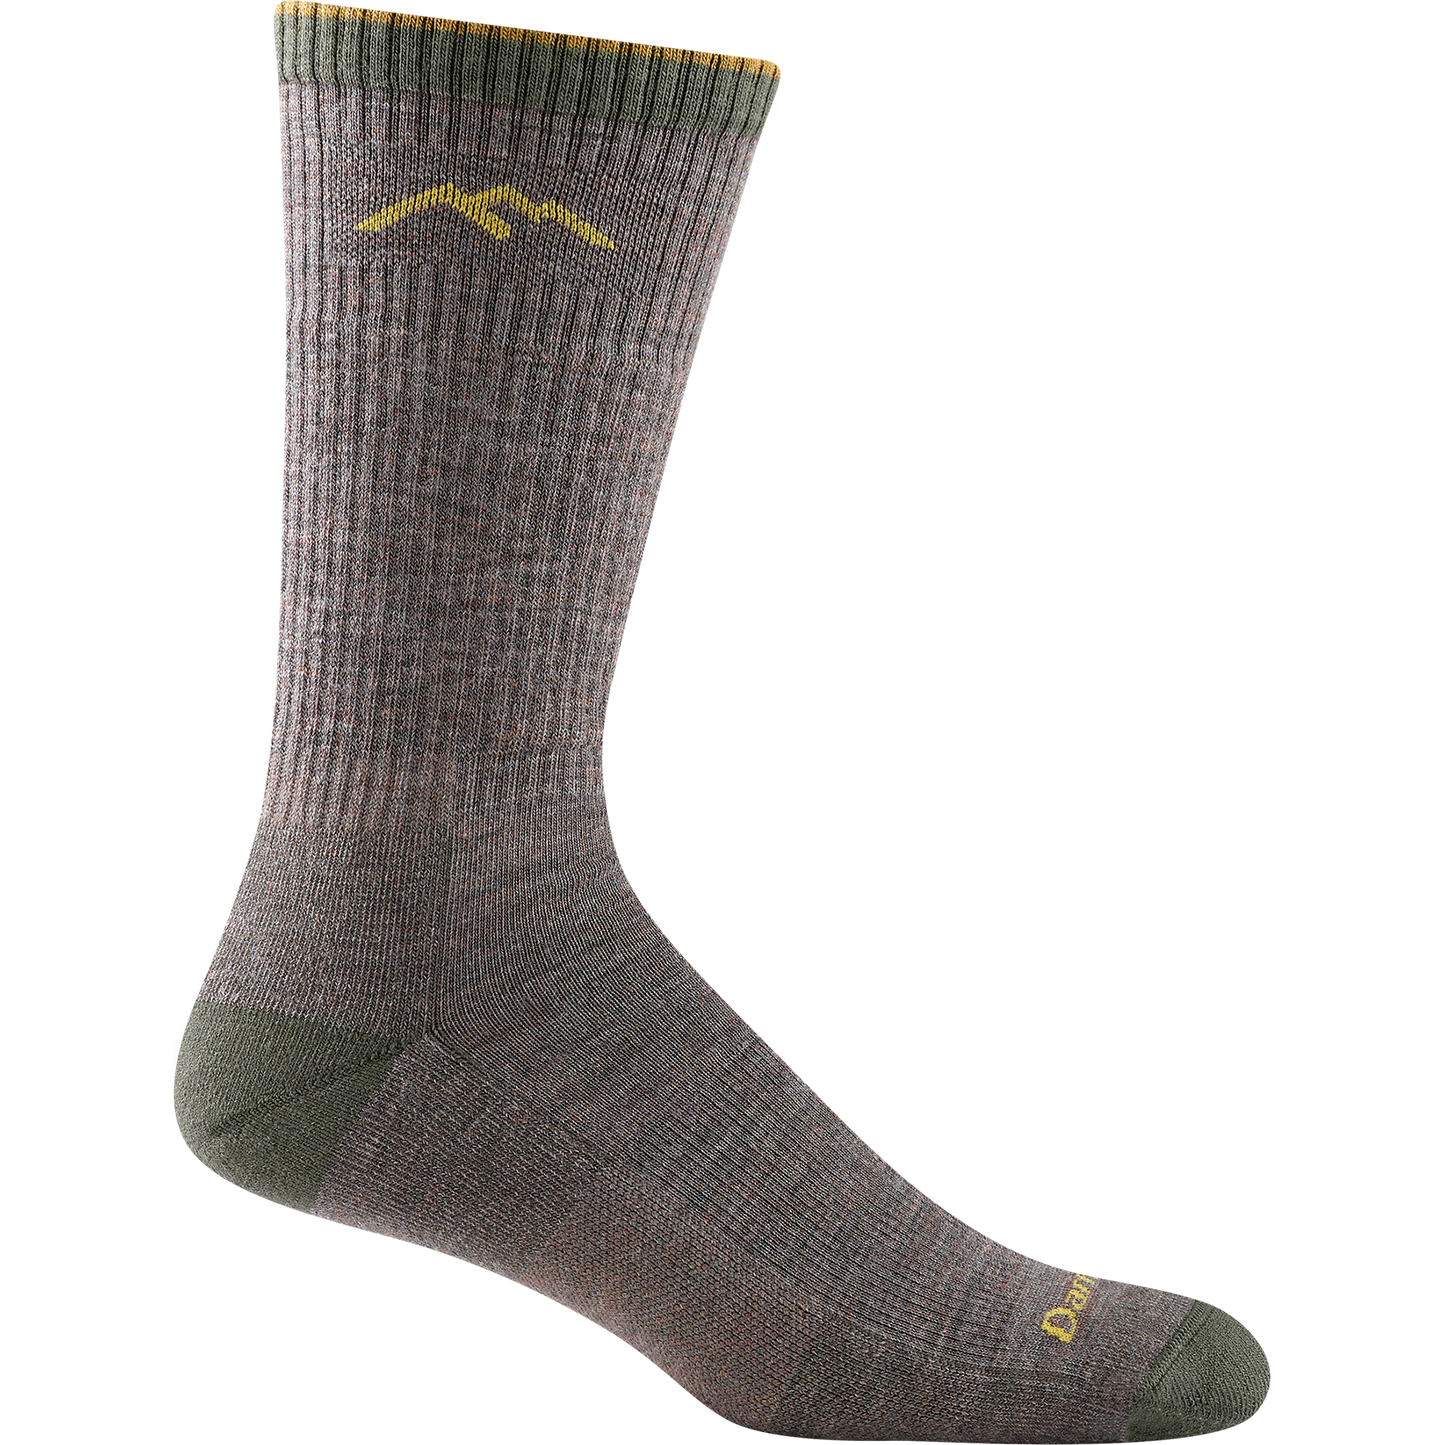 Darn tough taupe sock with yellow mountain outline detail, olive green toe and heel